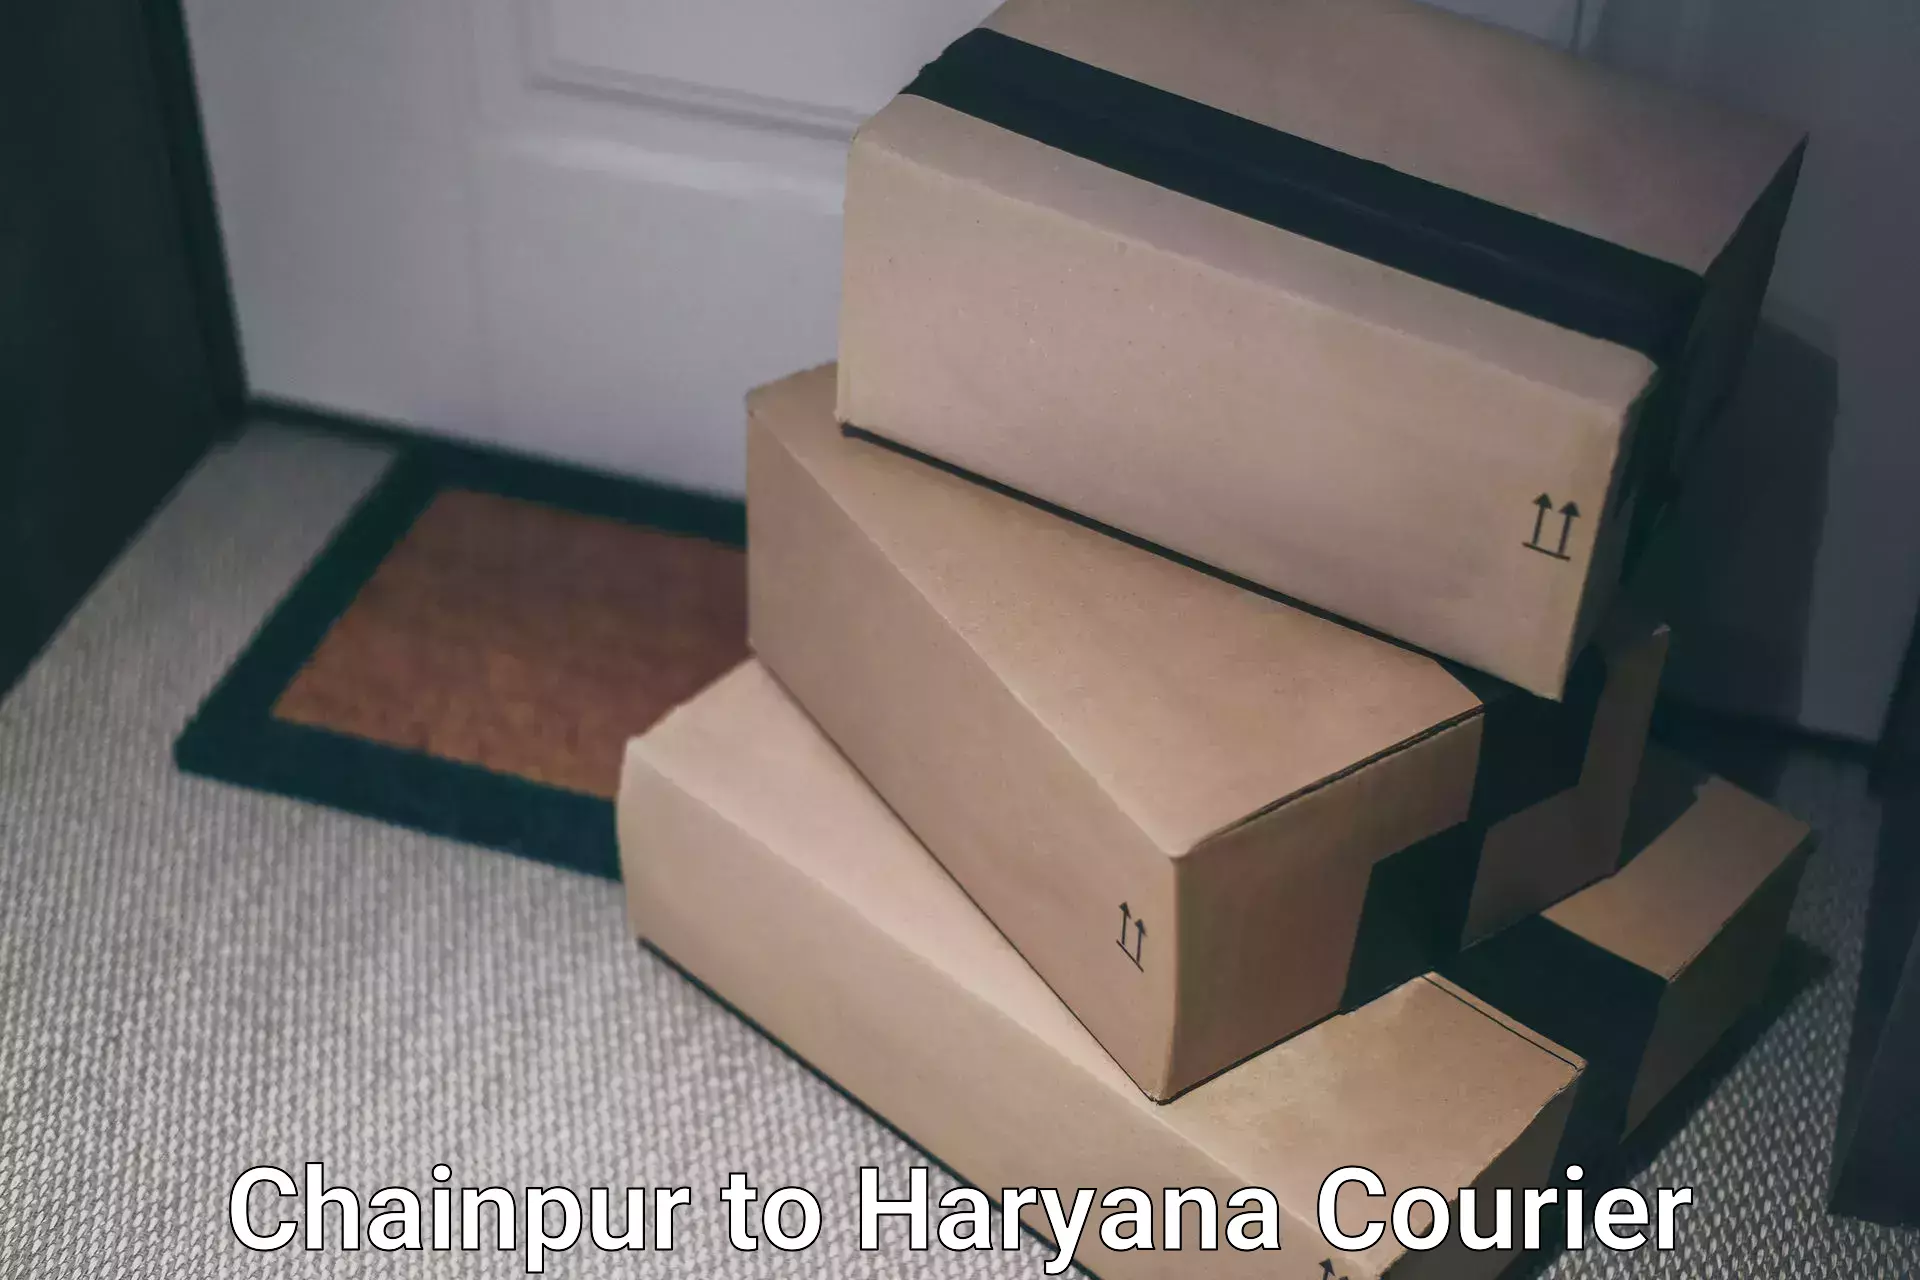 Local delivery service Chainpur to Haryana